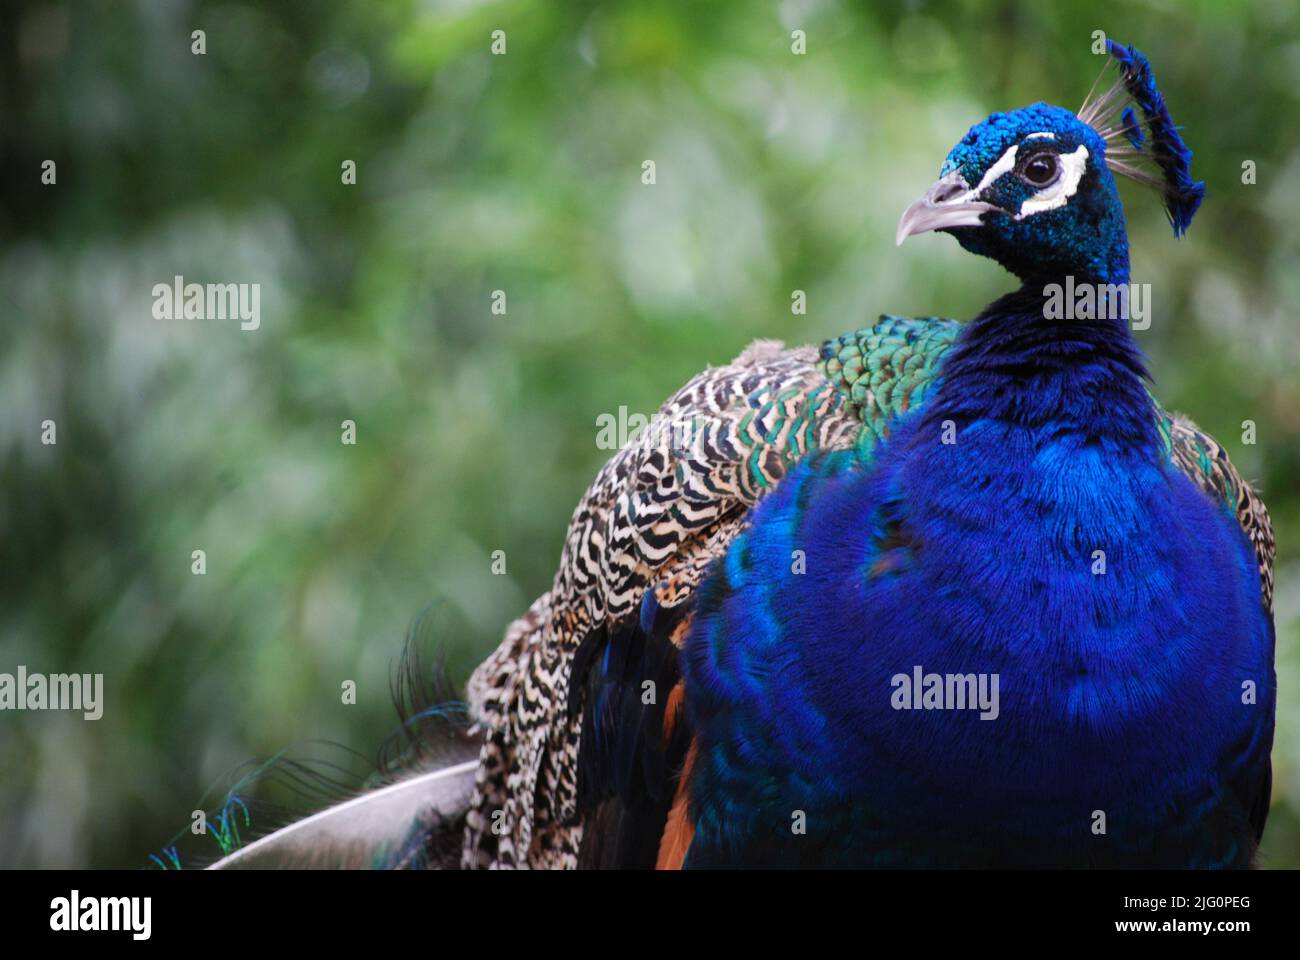 Peacock roaming in the Bronx Zoo - Colorful Bird Stock Photo